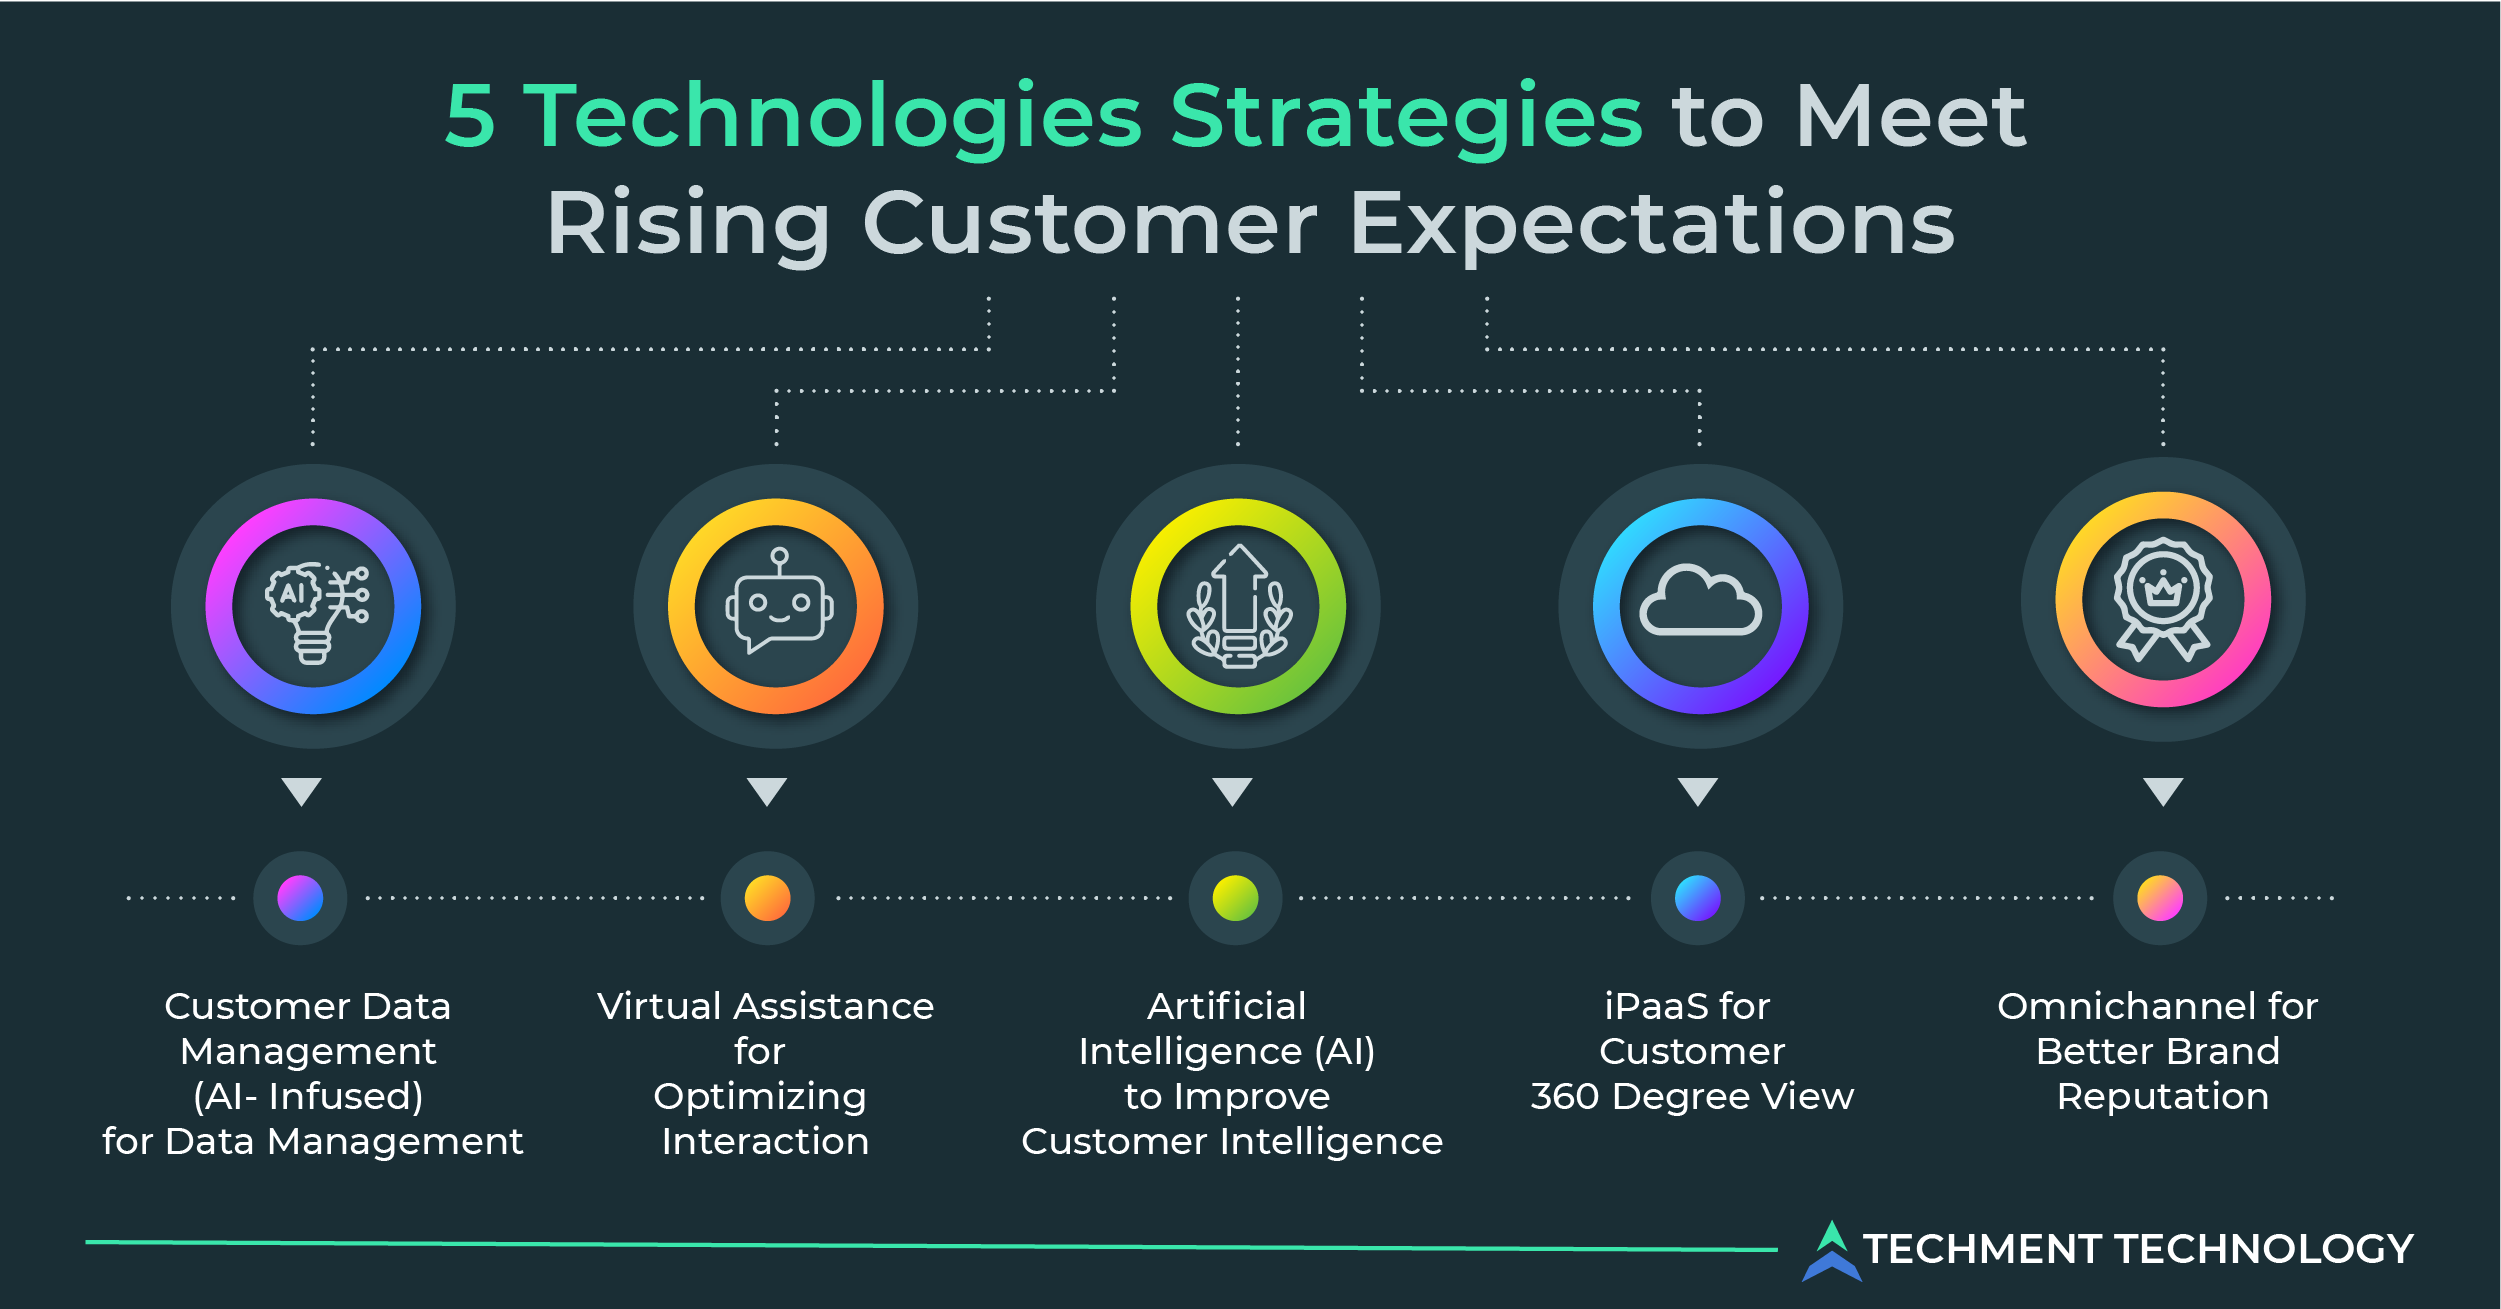 5 Technologies Strategies to Meet Rising Customer Expectations